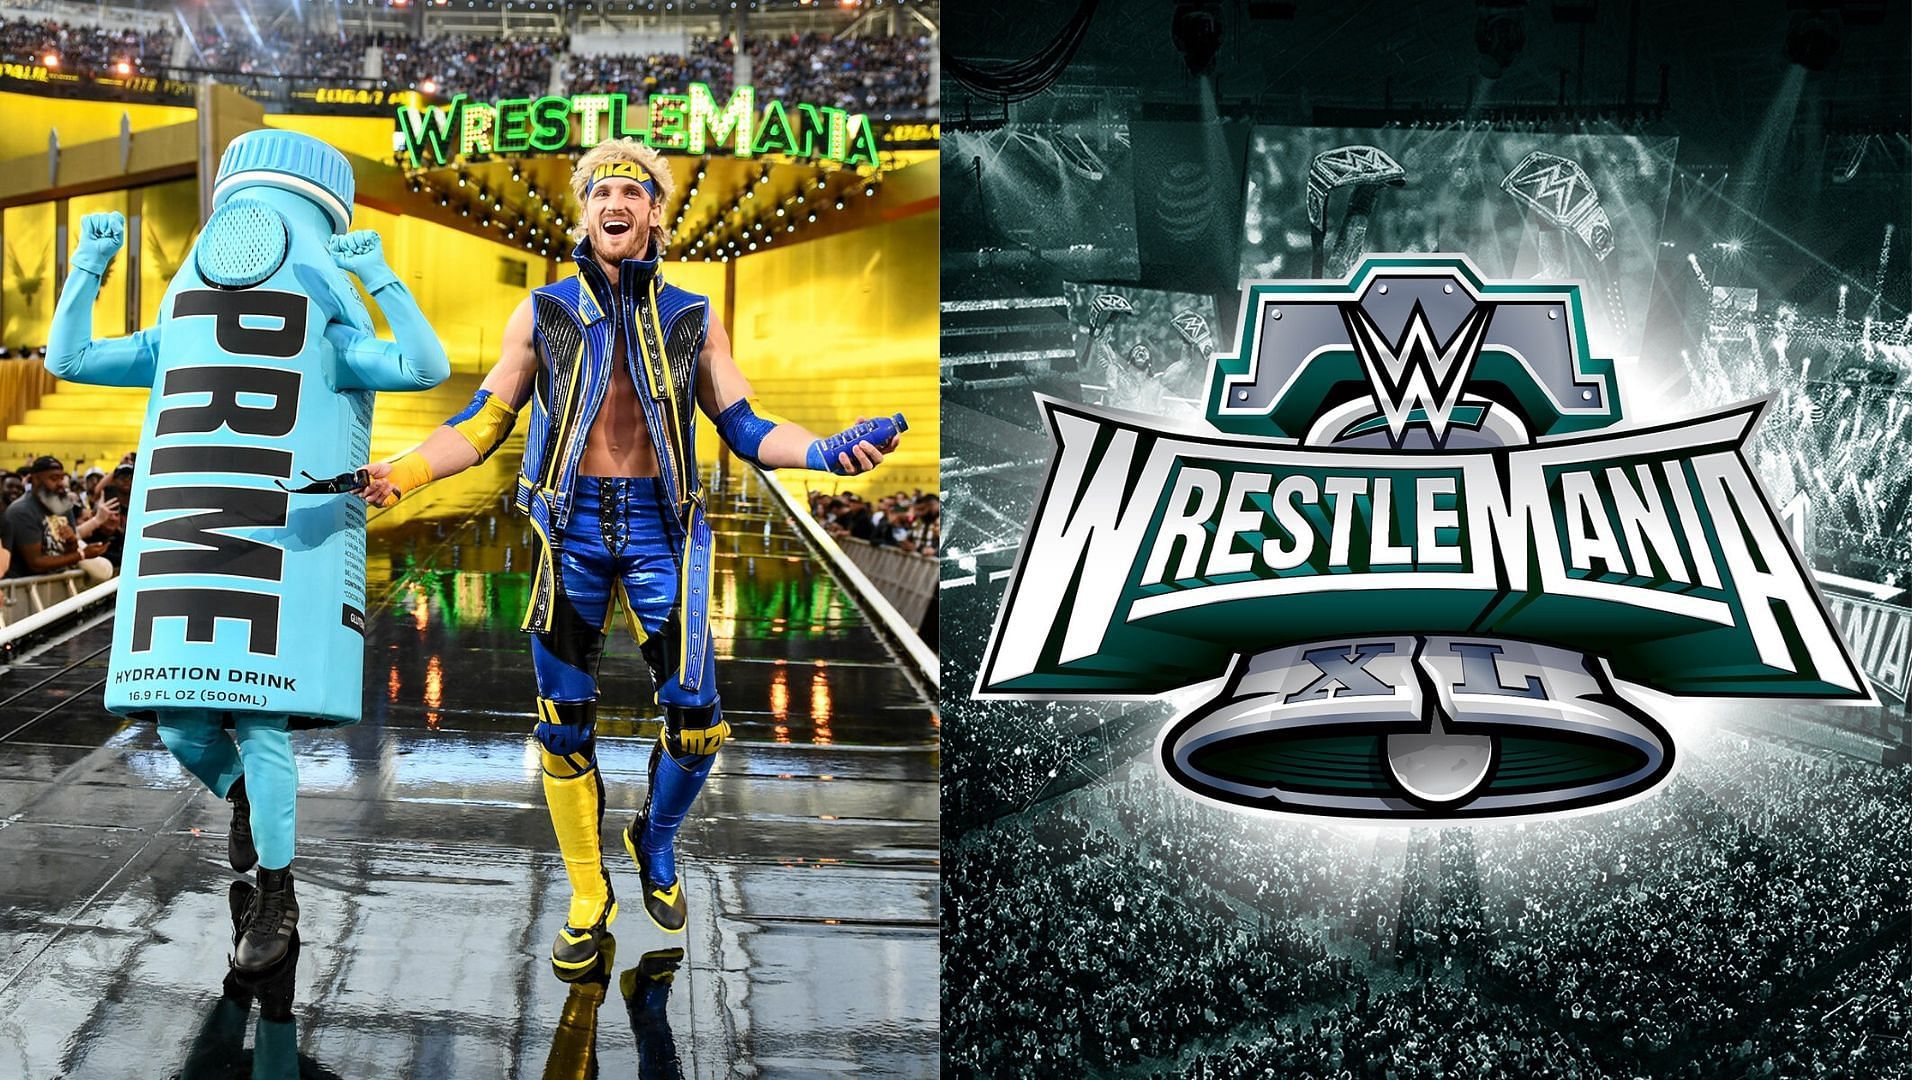 Wrestlemania 40 is set to take place at Lincoln Financial Field in Philadelphia